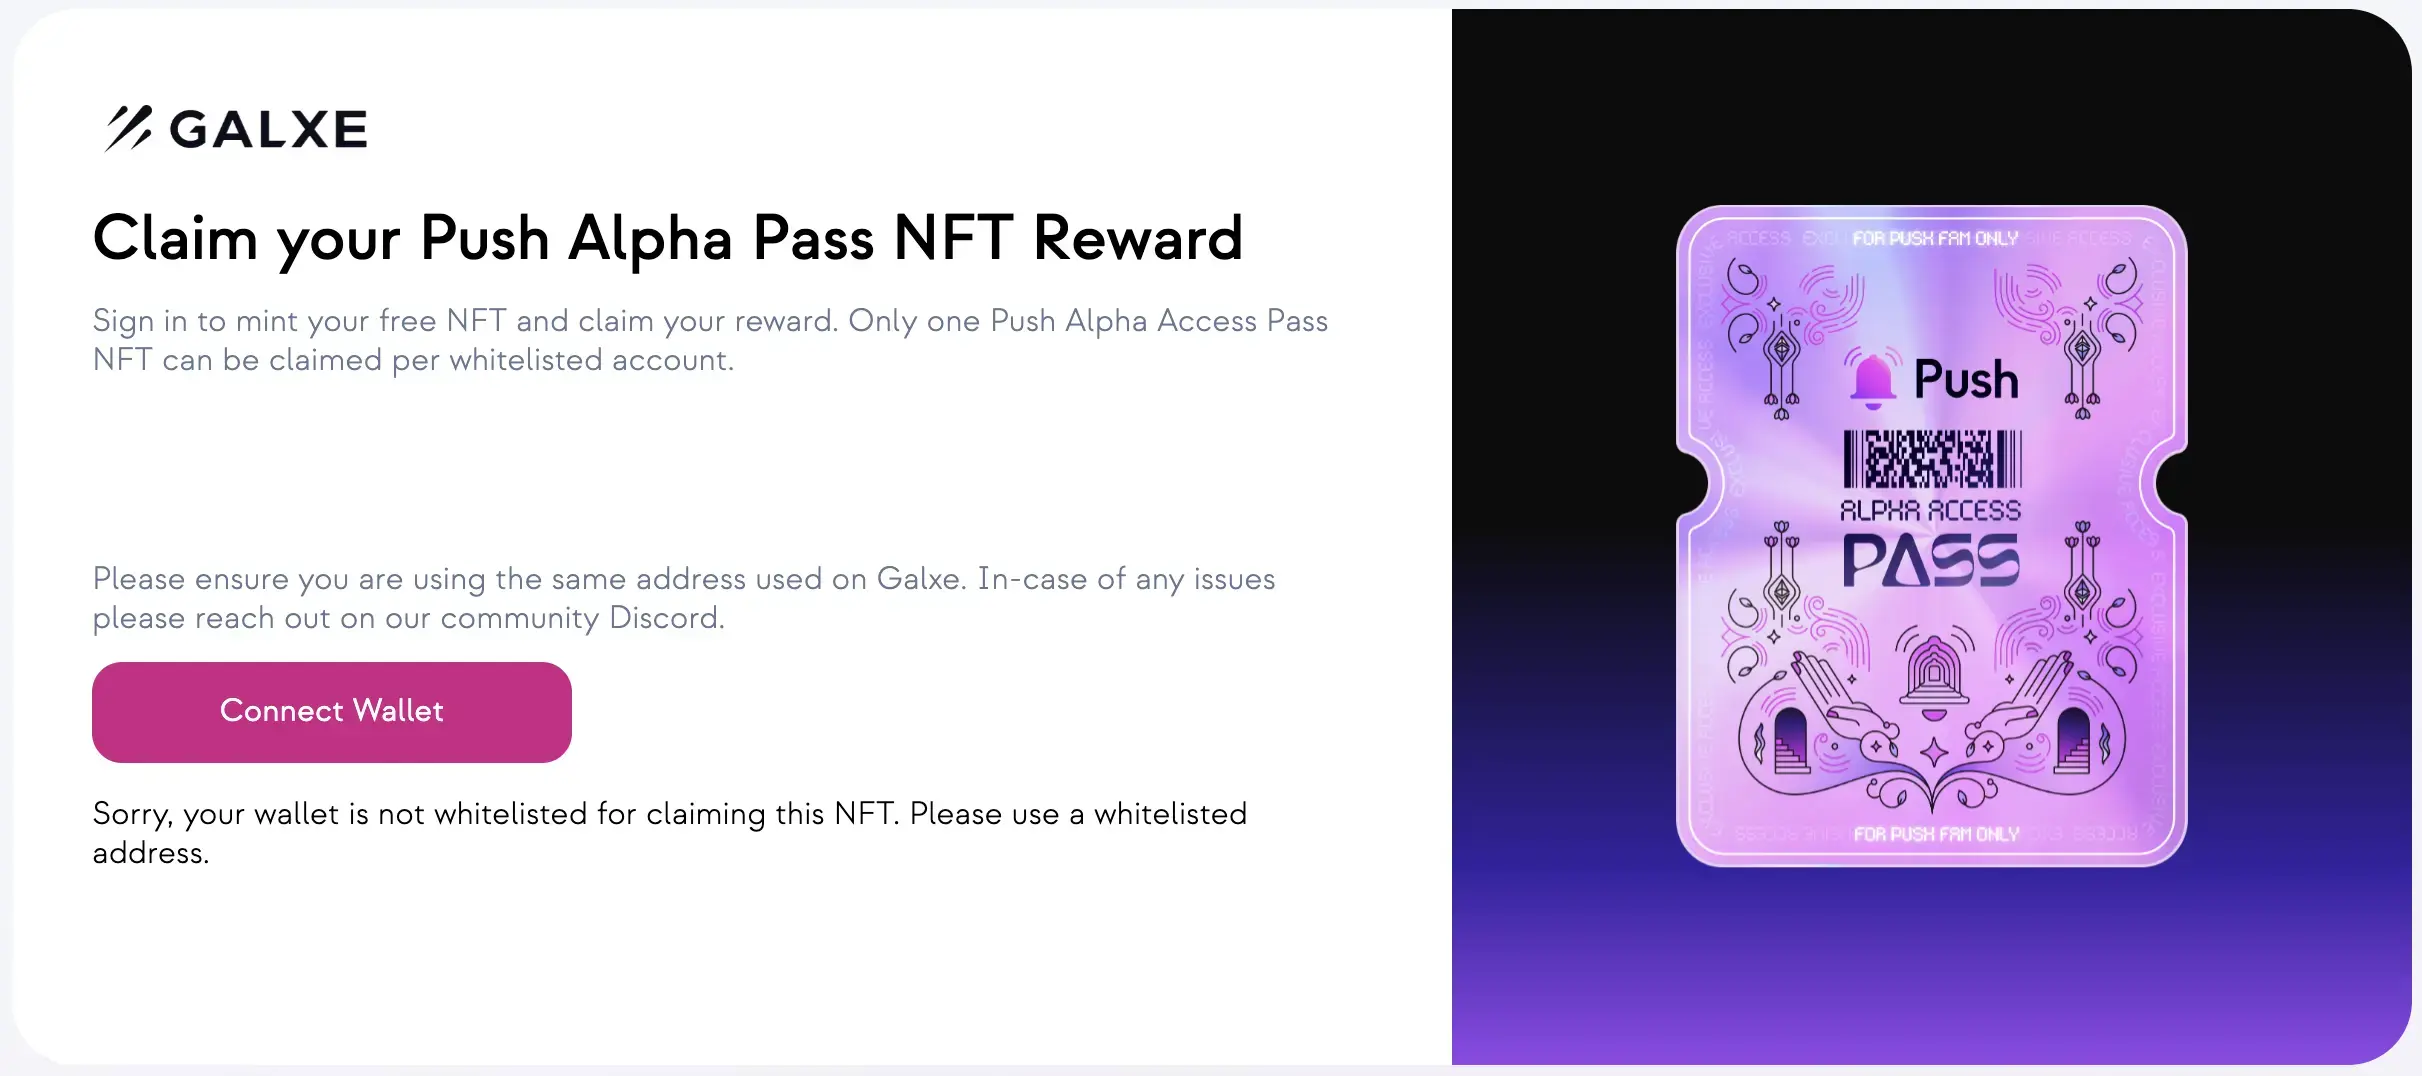 Cover Image of How to claim Push Alpha Access NFT